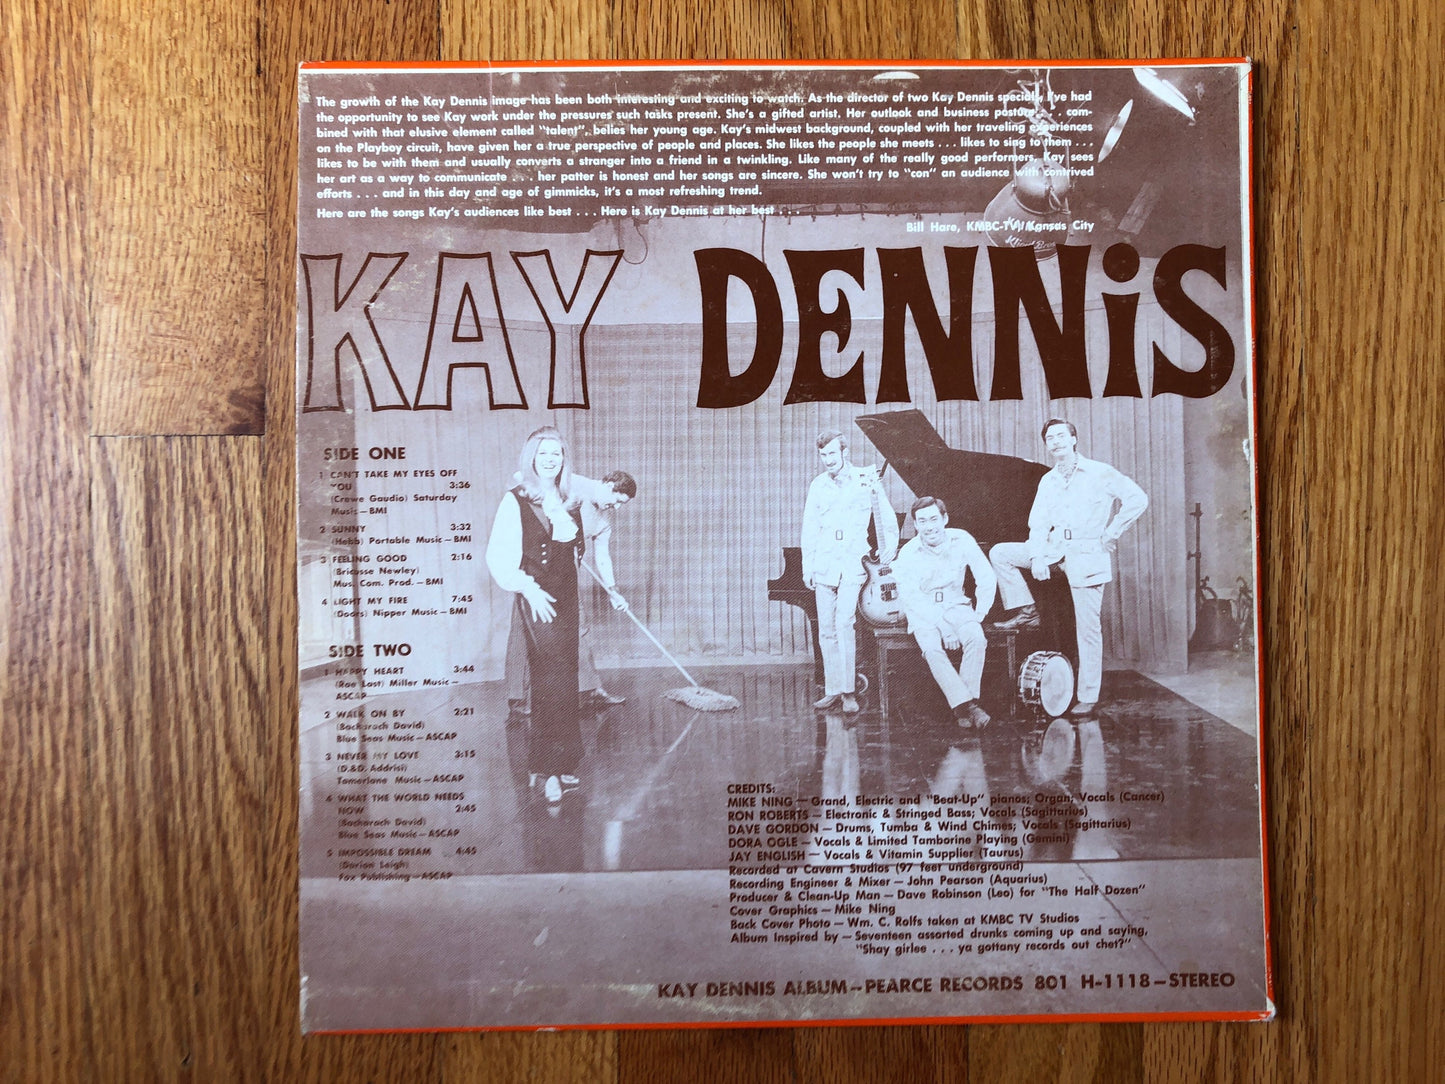 Kay Dennis, Self Titled, Vintage Record Pearce 801-H-1118, Walk on By, 1960's Lounge Music, Jazz Record, Rare Records, Vinyl record